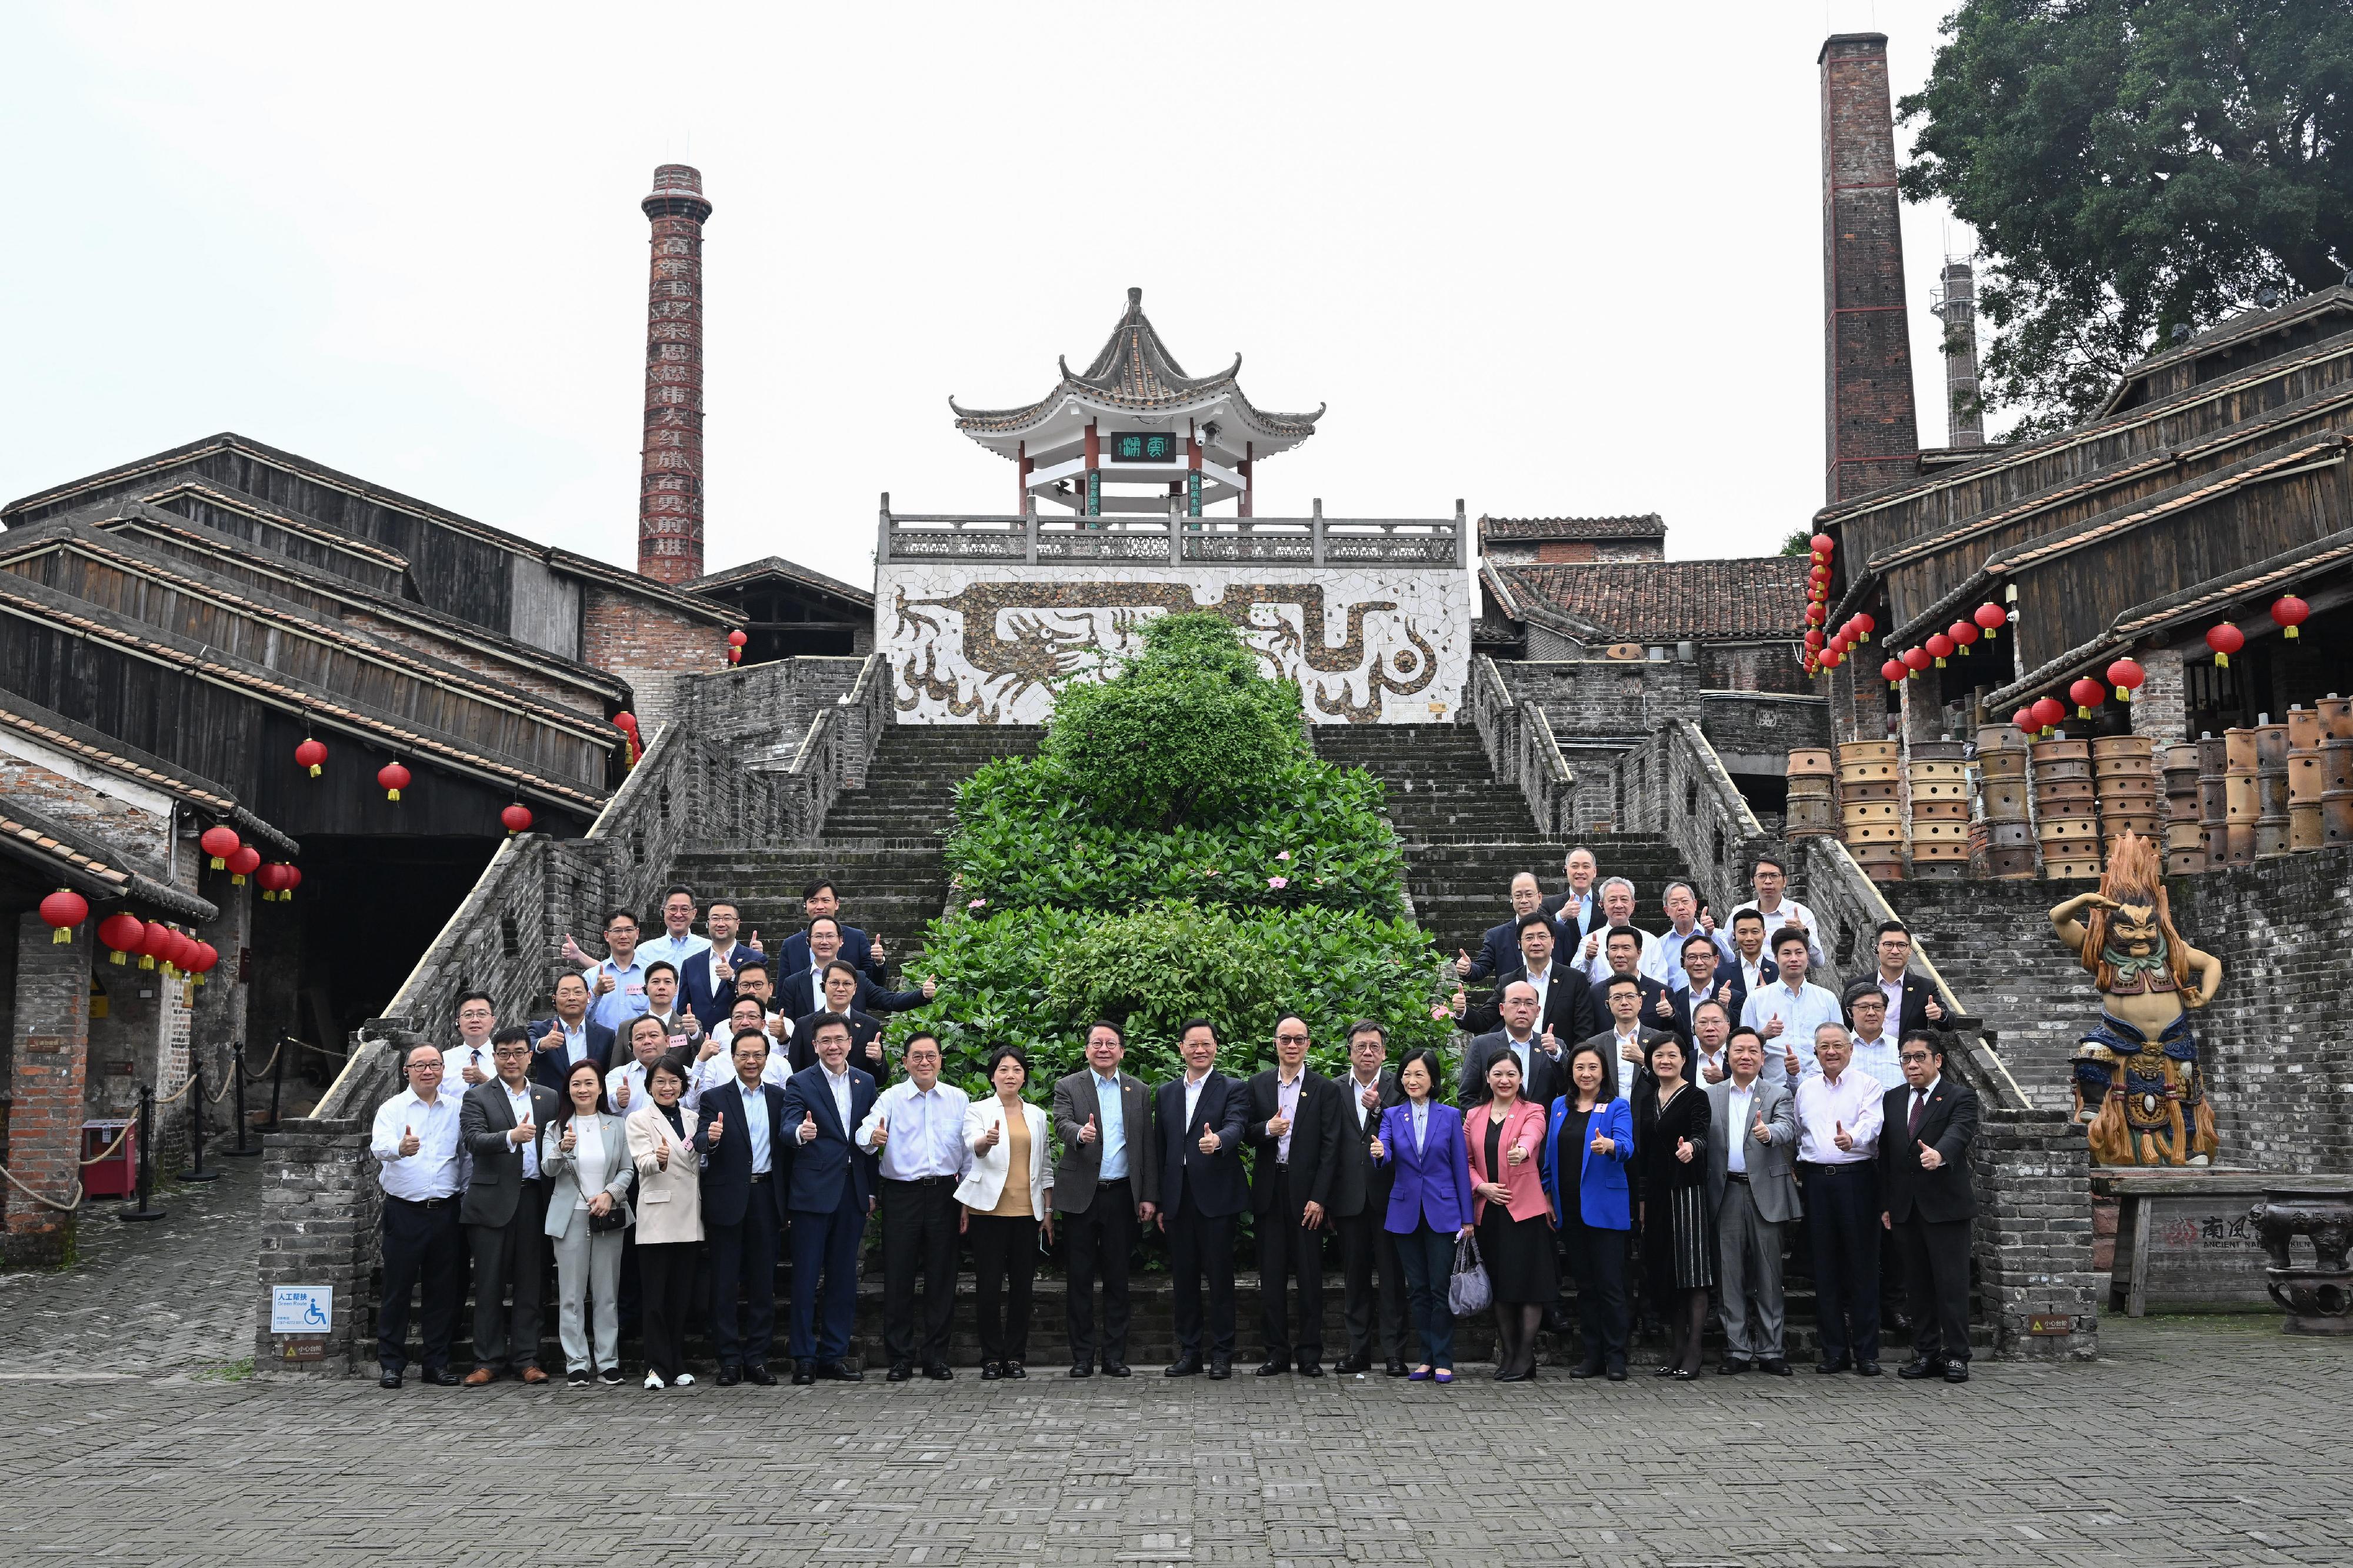 The delegation of the Hong Kong Special Administrative Region Government and the Legislative Council (LegCo) led by the Chief Executive, Mr John Lee, conducted their third-day visit in the Guangdong-Hong Kong-Macao Greater Bay Area today (April 23). Photo shows the Chief Secretary for Administration, Mr Chan Kwok-ki (front row, ninth left); Member of the Standing Committee of the Foshan Municipal Committee of the Communist Party of China and the Head of the United Front Work Department of the Foshan Municipal Committee of the Communist Party of China, Mr Ding Xifeng (front row, centre); the Secretary for Commerce and Economic Development, Mr Algernon Yau (front row, eighth right); the Secretary for Innovation, Technology and Industry, Professor Sun Dong (front row, sixth left), and LegCo members at the Ancient Nanfeng Kiln.